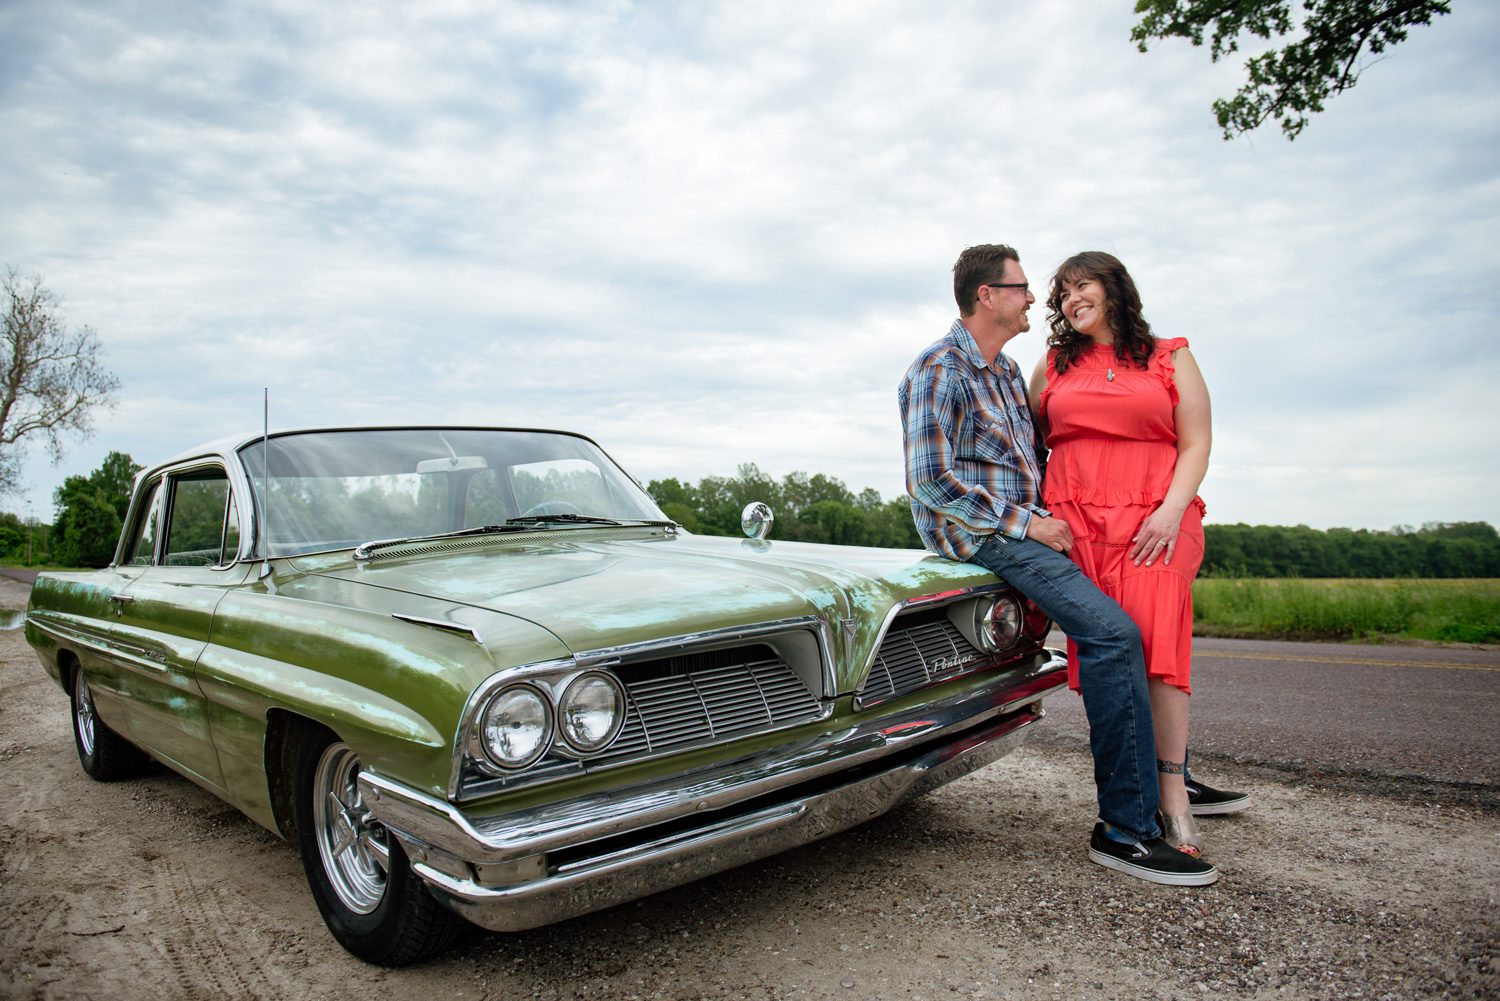 Couple smile at each other sitting on vintage Pontiac car